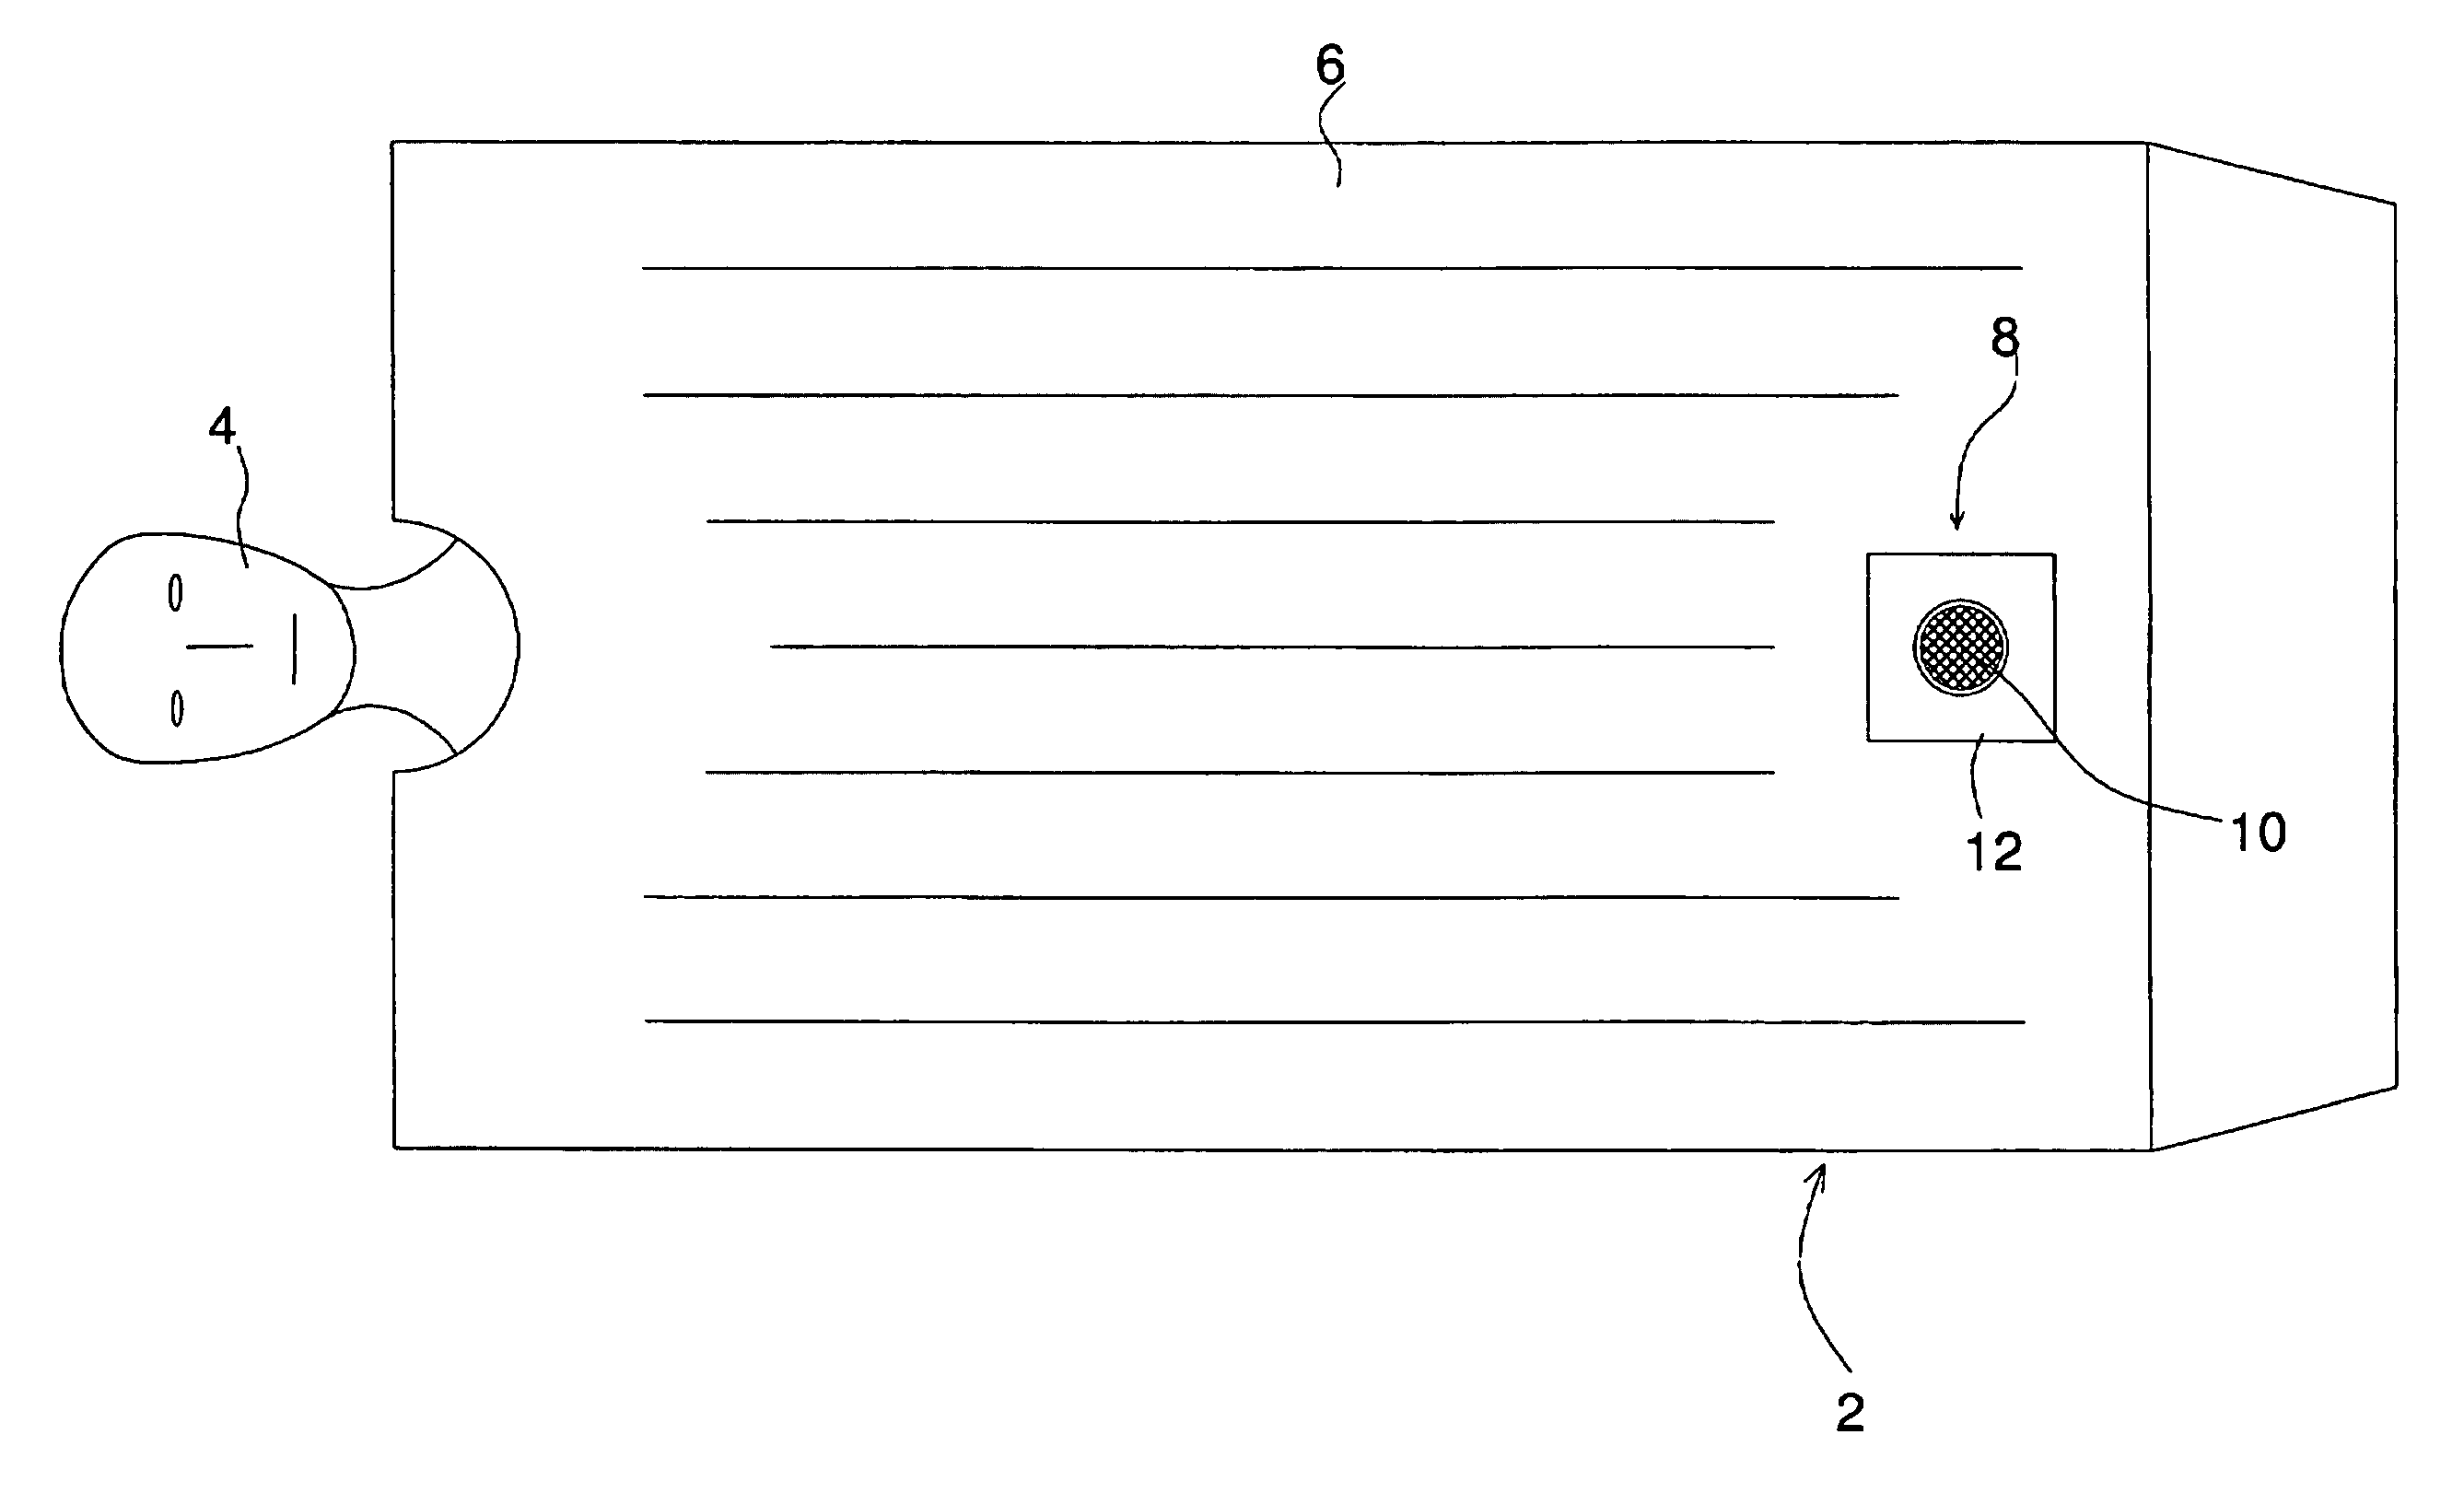 Restrictor regulated air flow blanket, system utilizing such blanket and method therefor